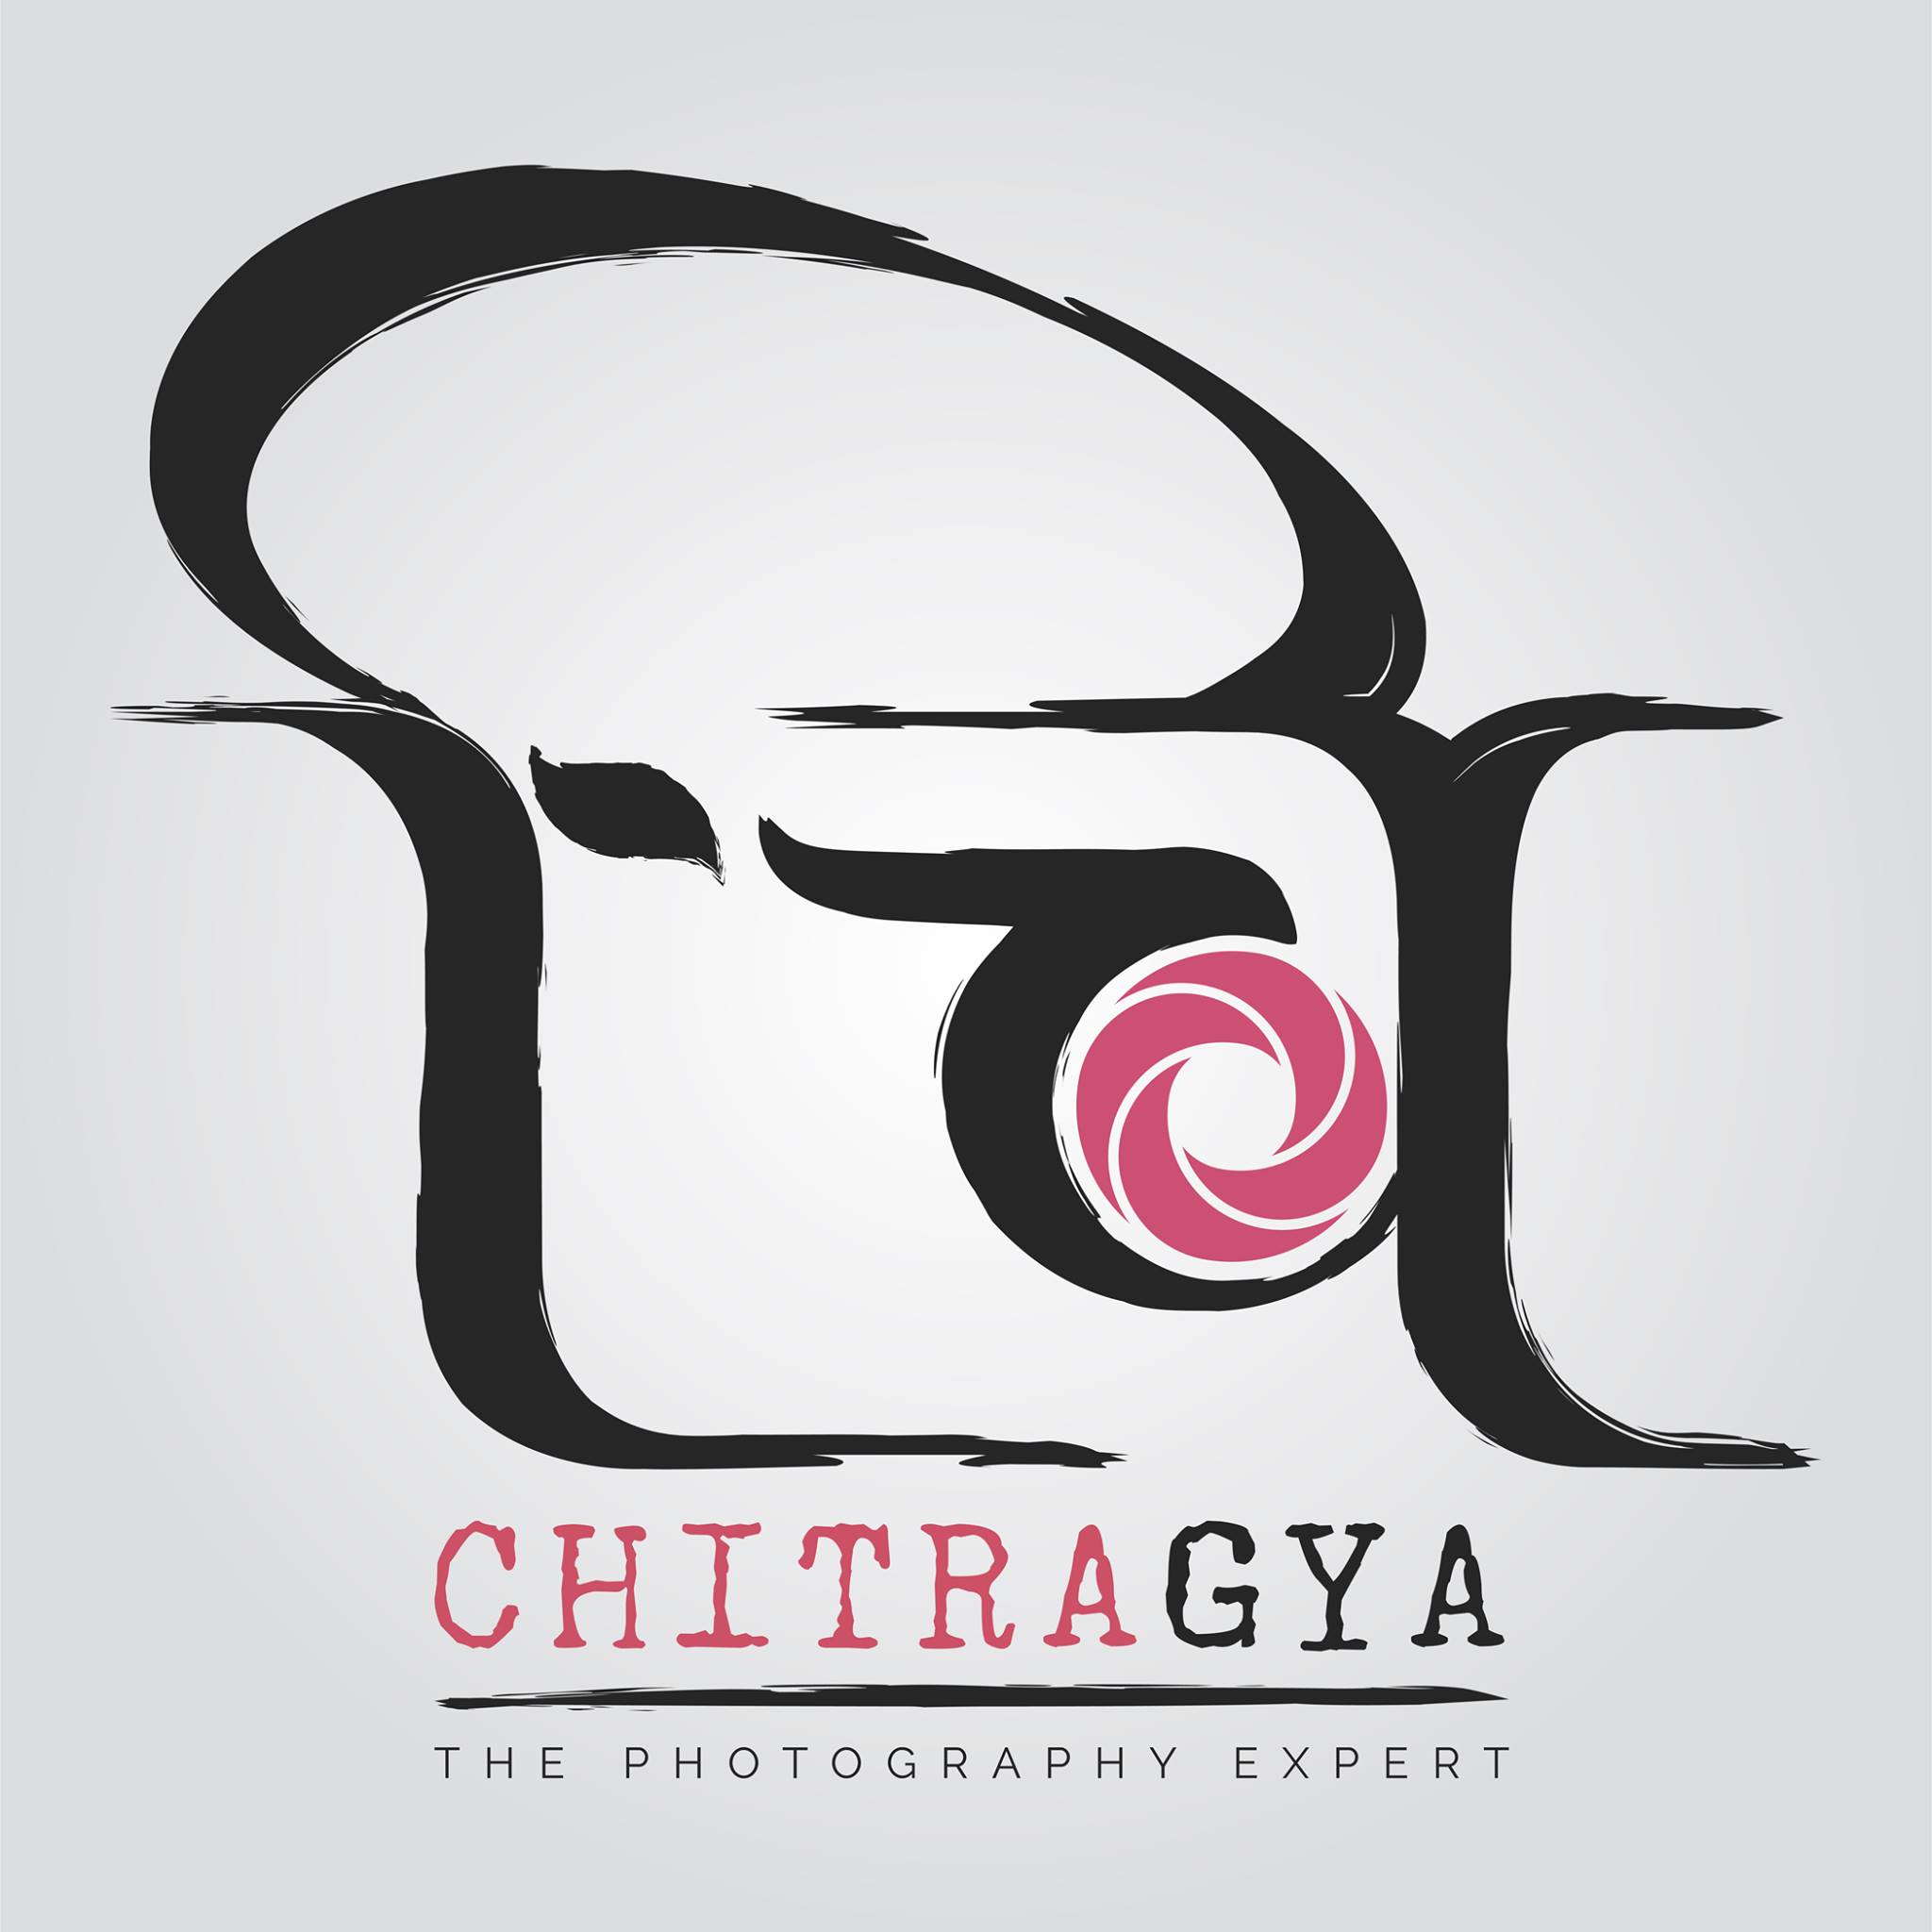 Chitragya - The Photography Expert|Photographer|Event Services